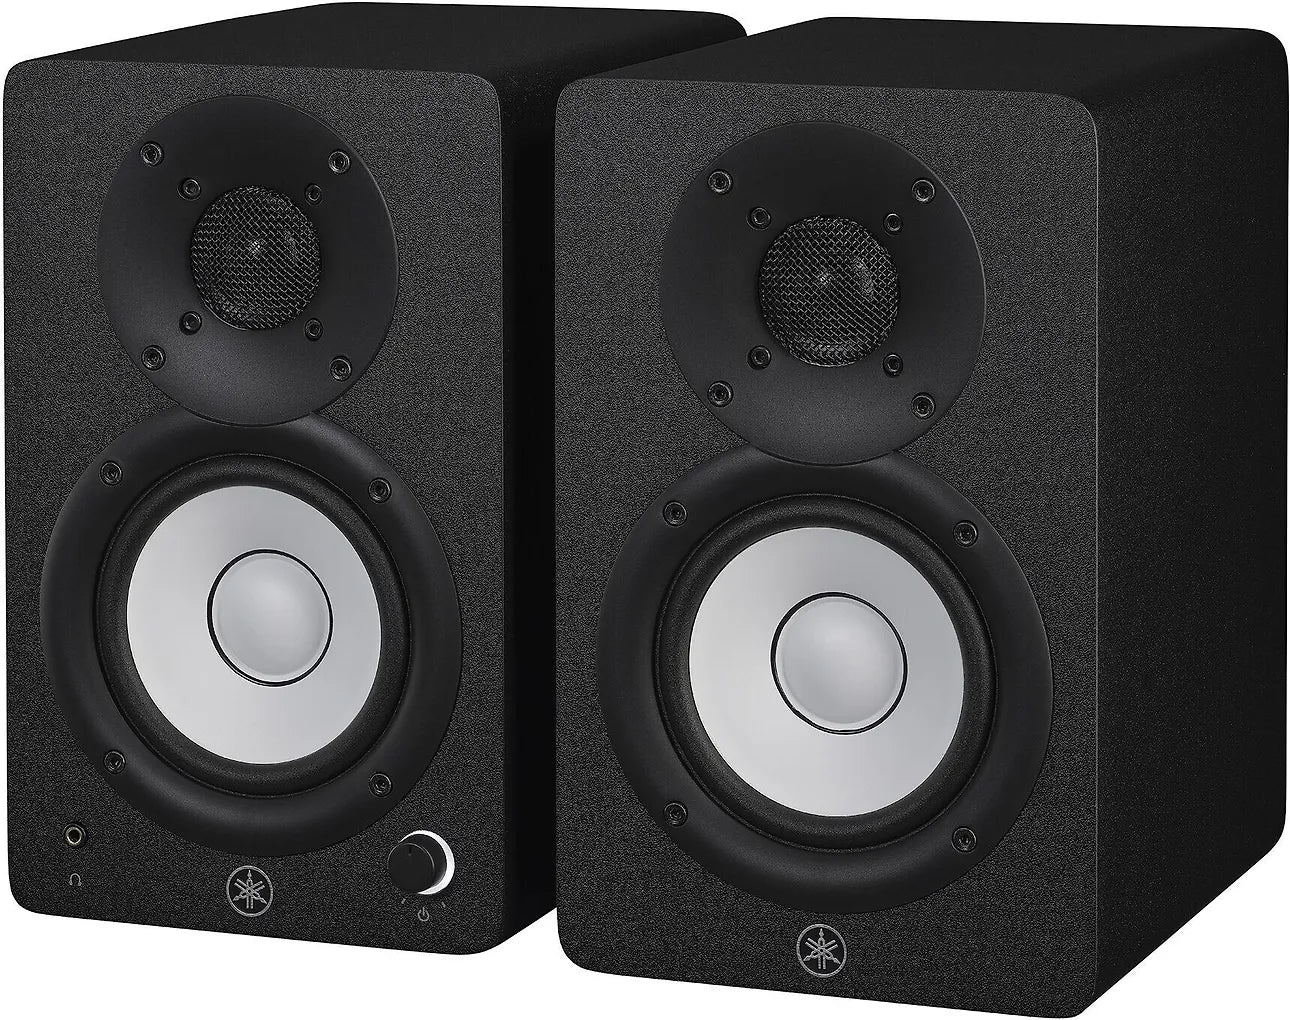 Pair of Yamaha HS4 active speakers